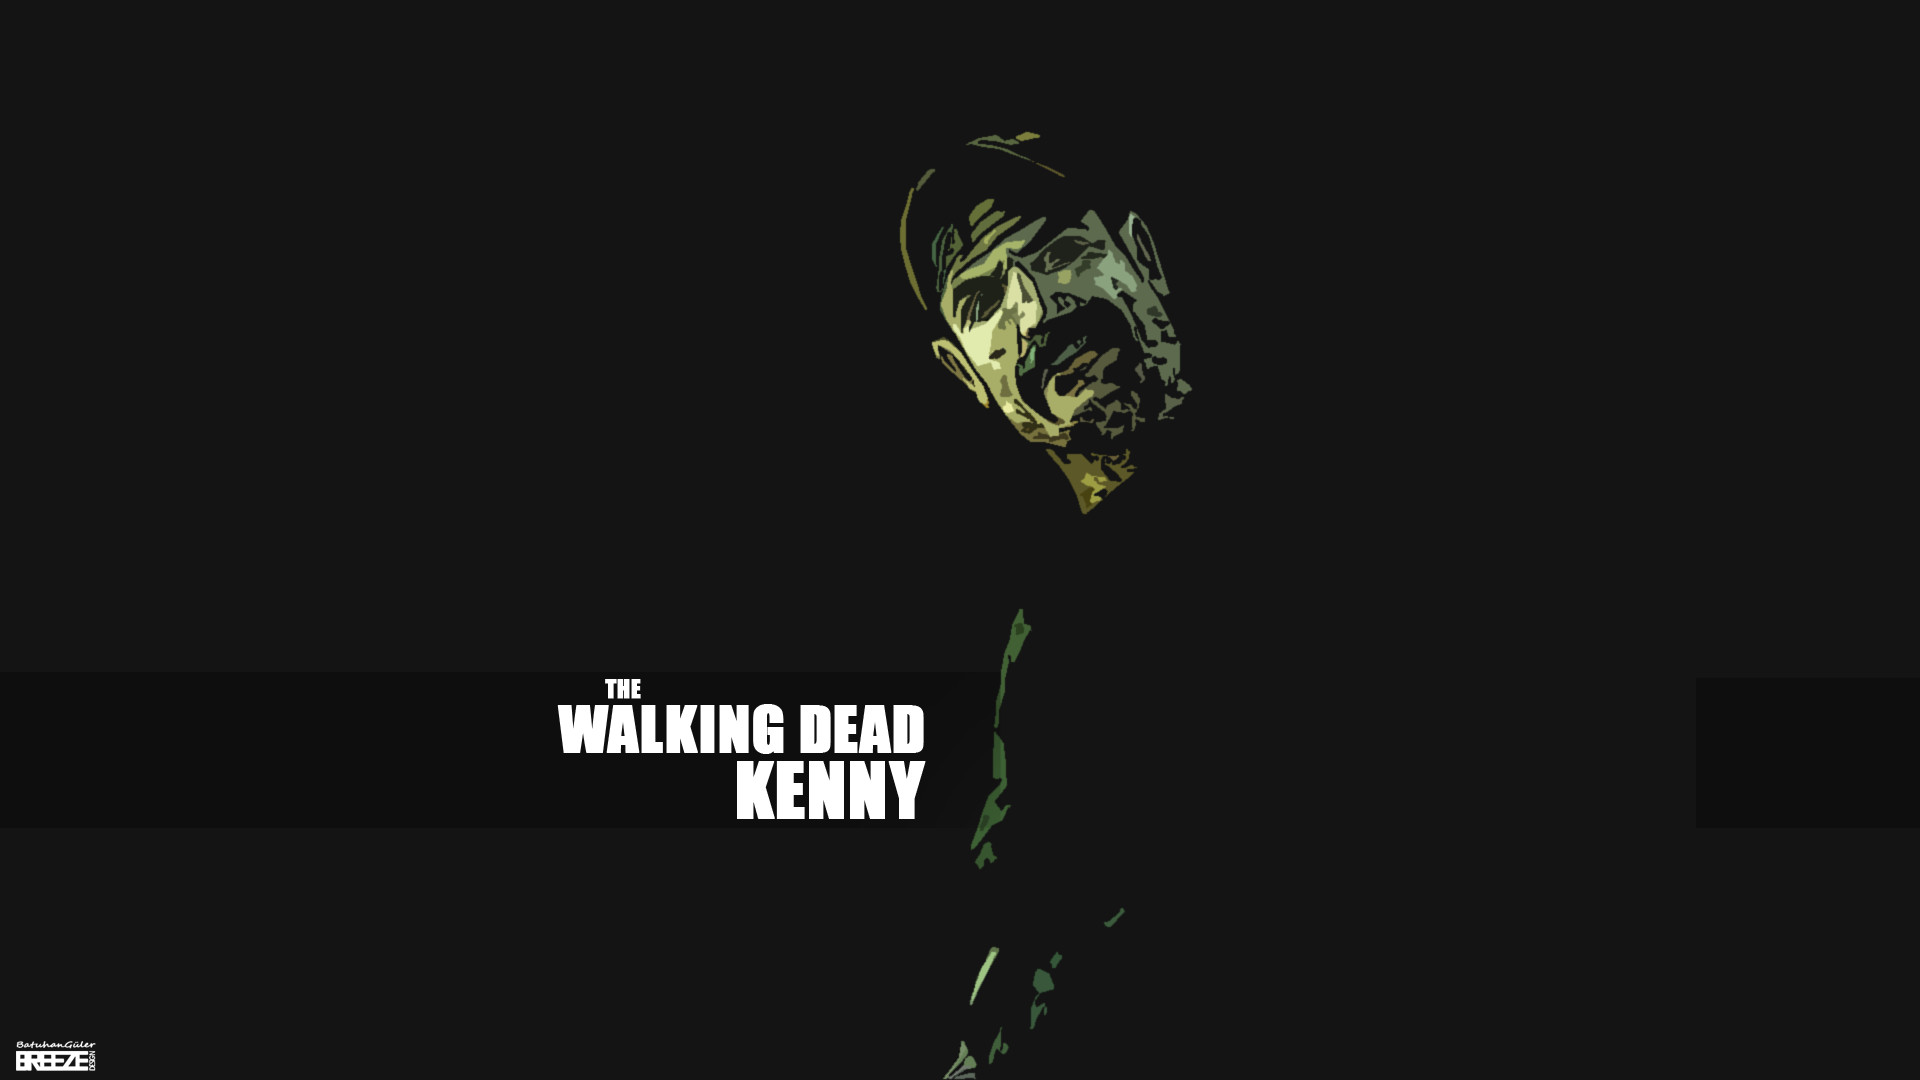 1920x1080 ... The Walking Dead Kenny - Wallpaper by Syrastra